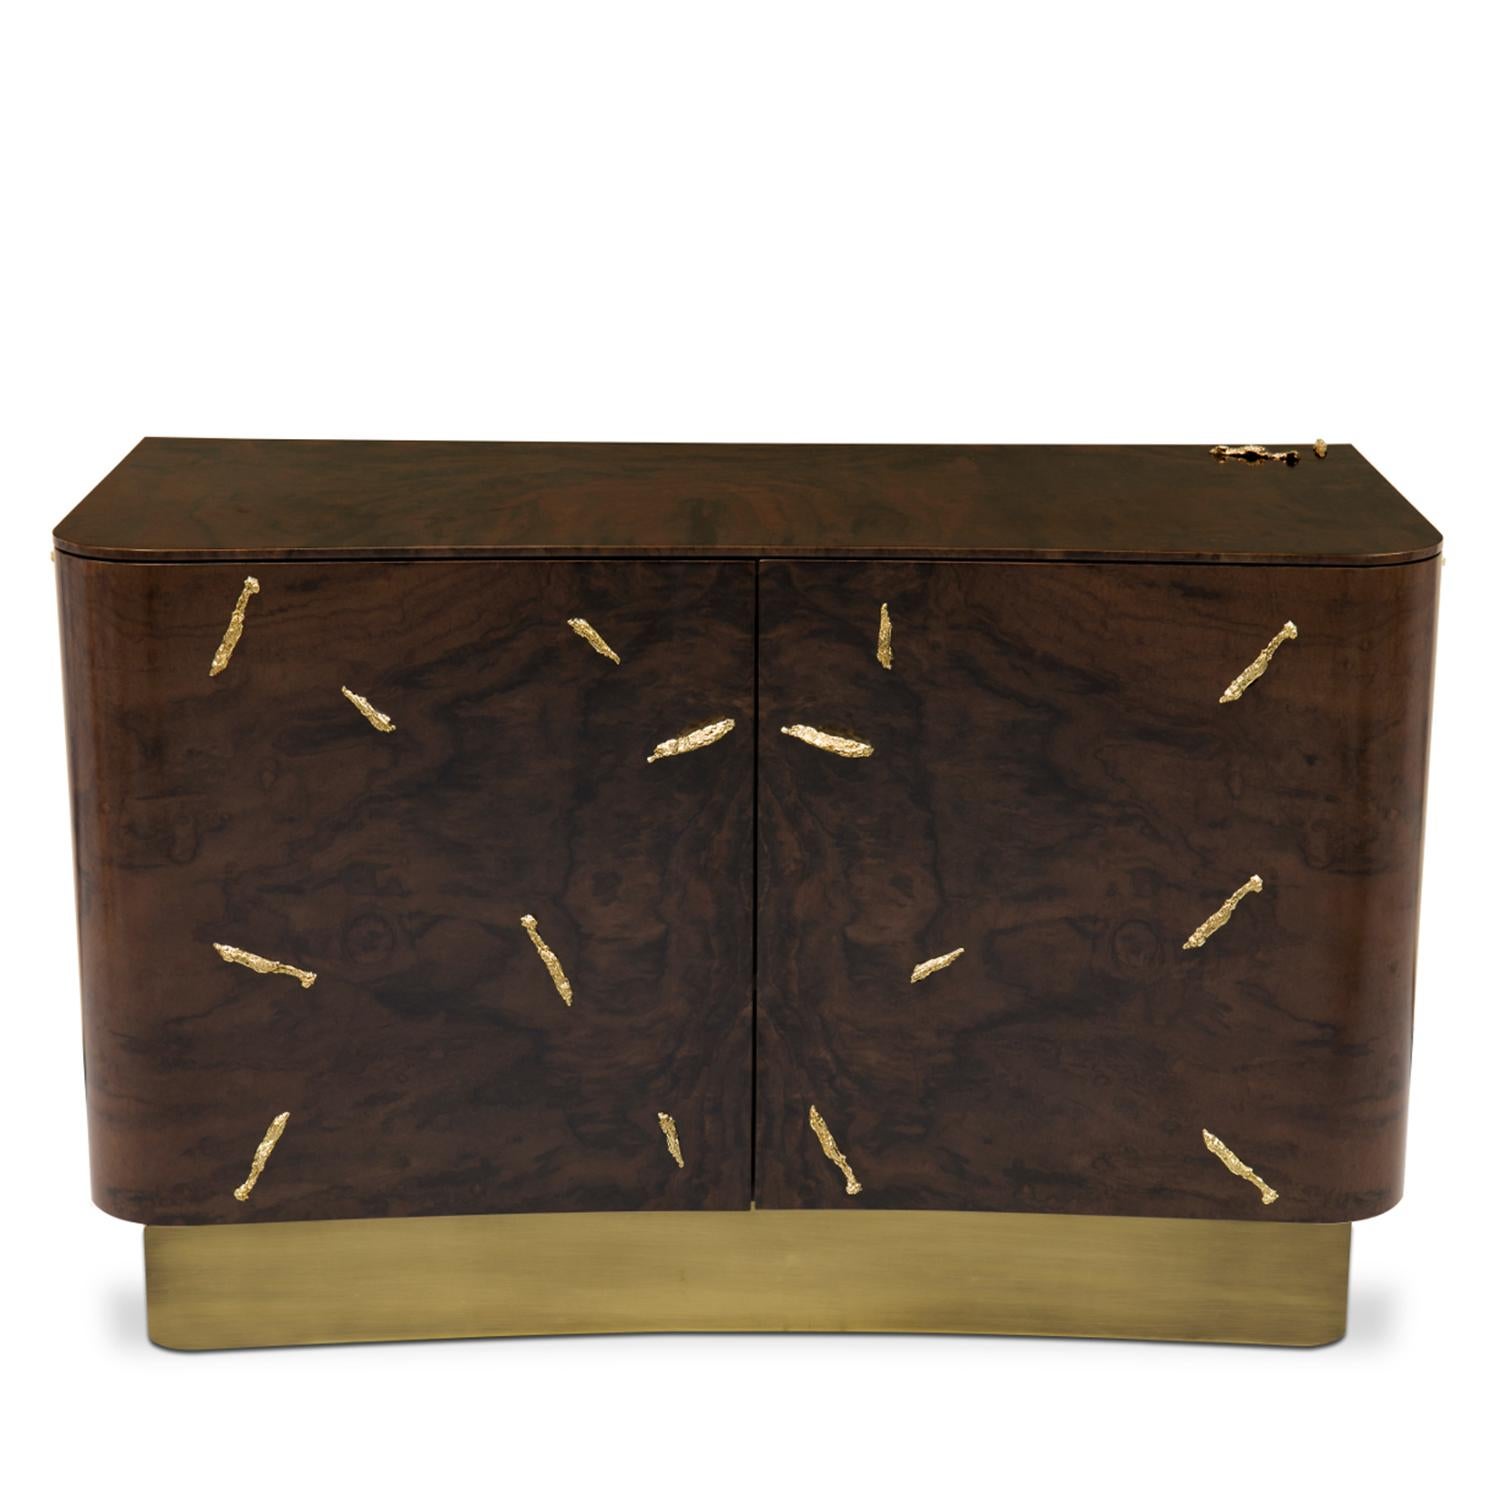 Cabinet Dresser Tarius Large with wooden structure with solid walnut
veneer in matte finish. With polished solid brass details and with
brushed aged brass base. With 2 doors and 2 drawers made inside 
with solid poplar wood veneer with walnut veneer